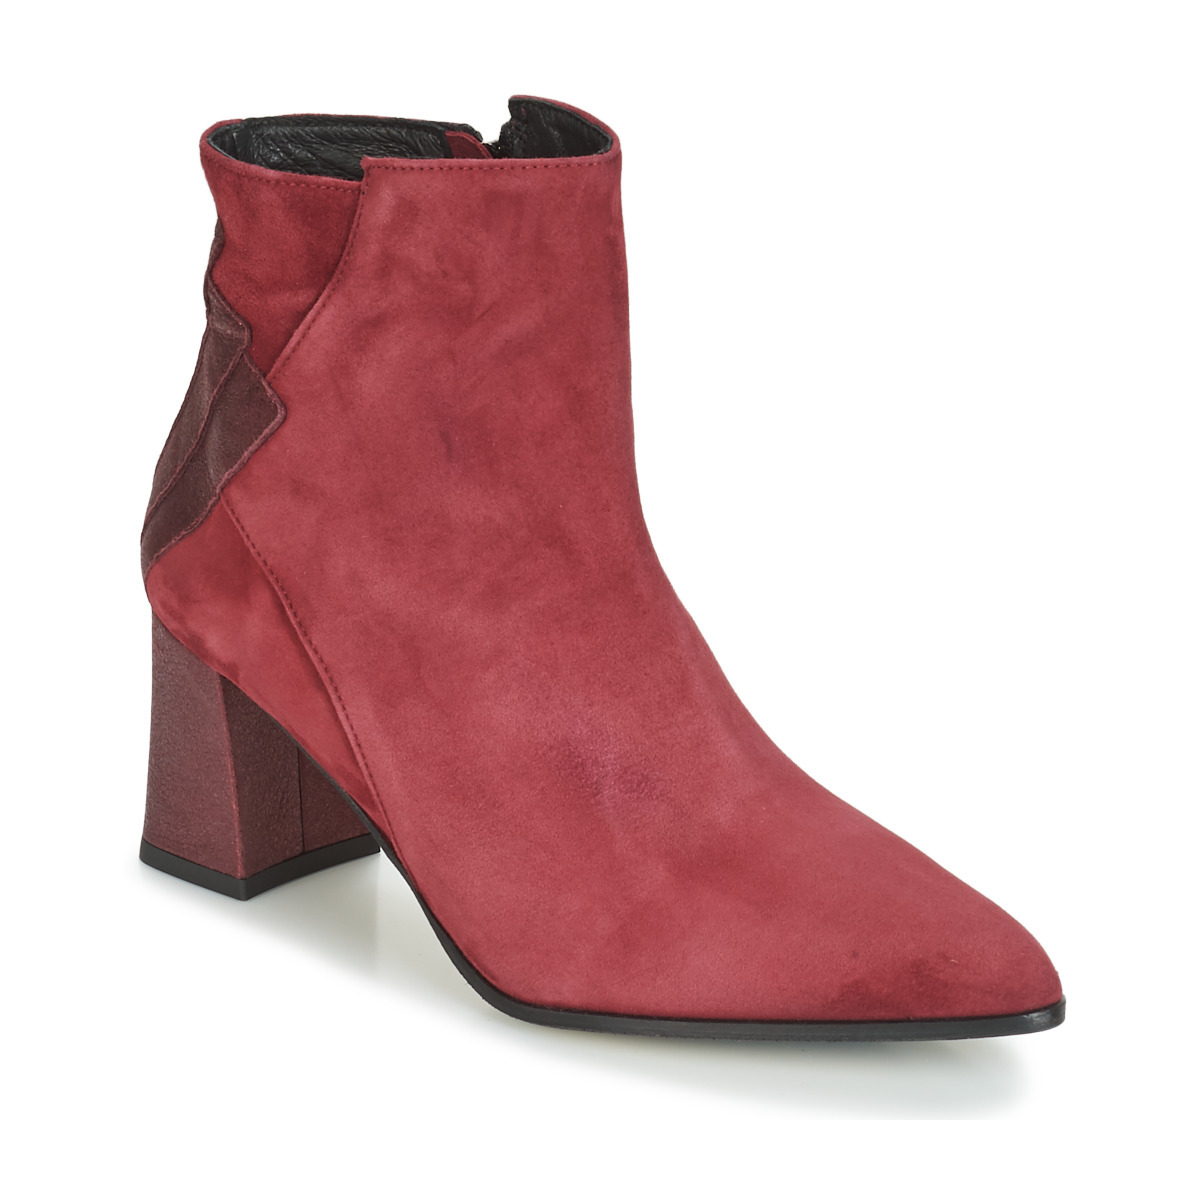 Elizabeth Stuart - Lady Ankle Boots in Red at Spartoo GOOFASH